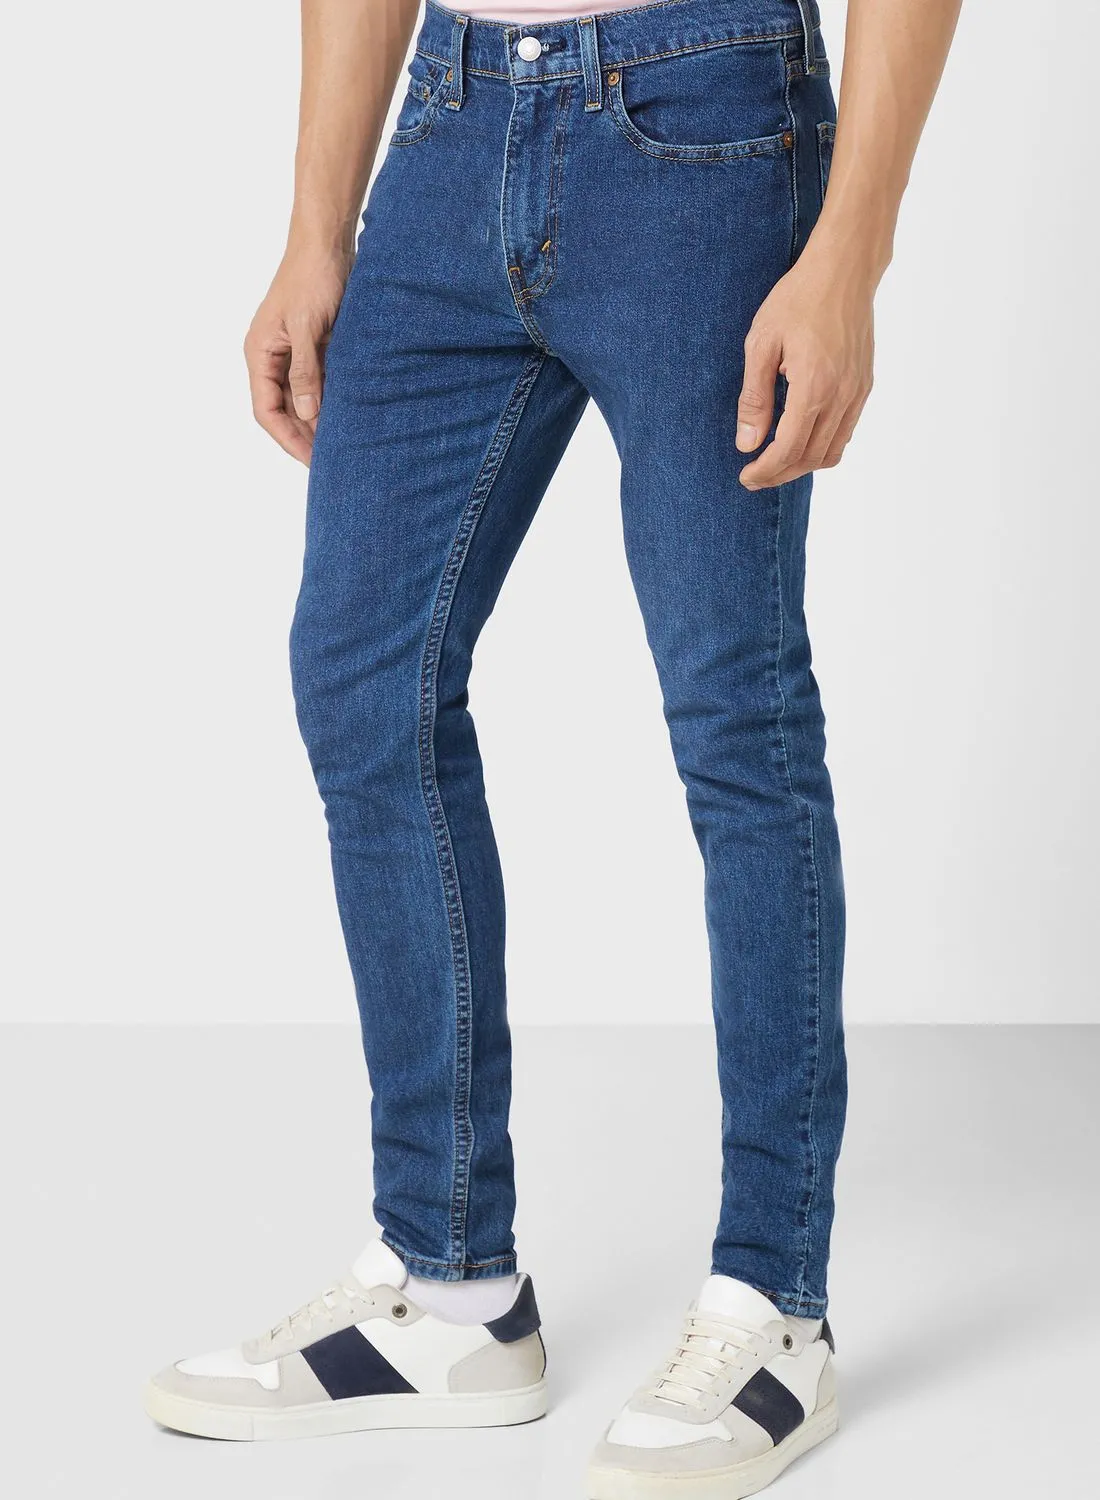 Levi's Rinse Wash Skinny Fit Jeans